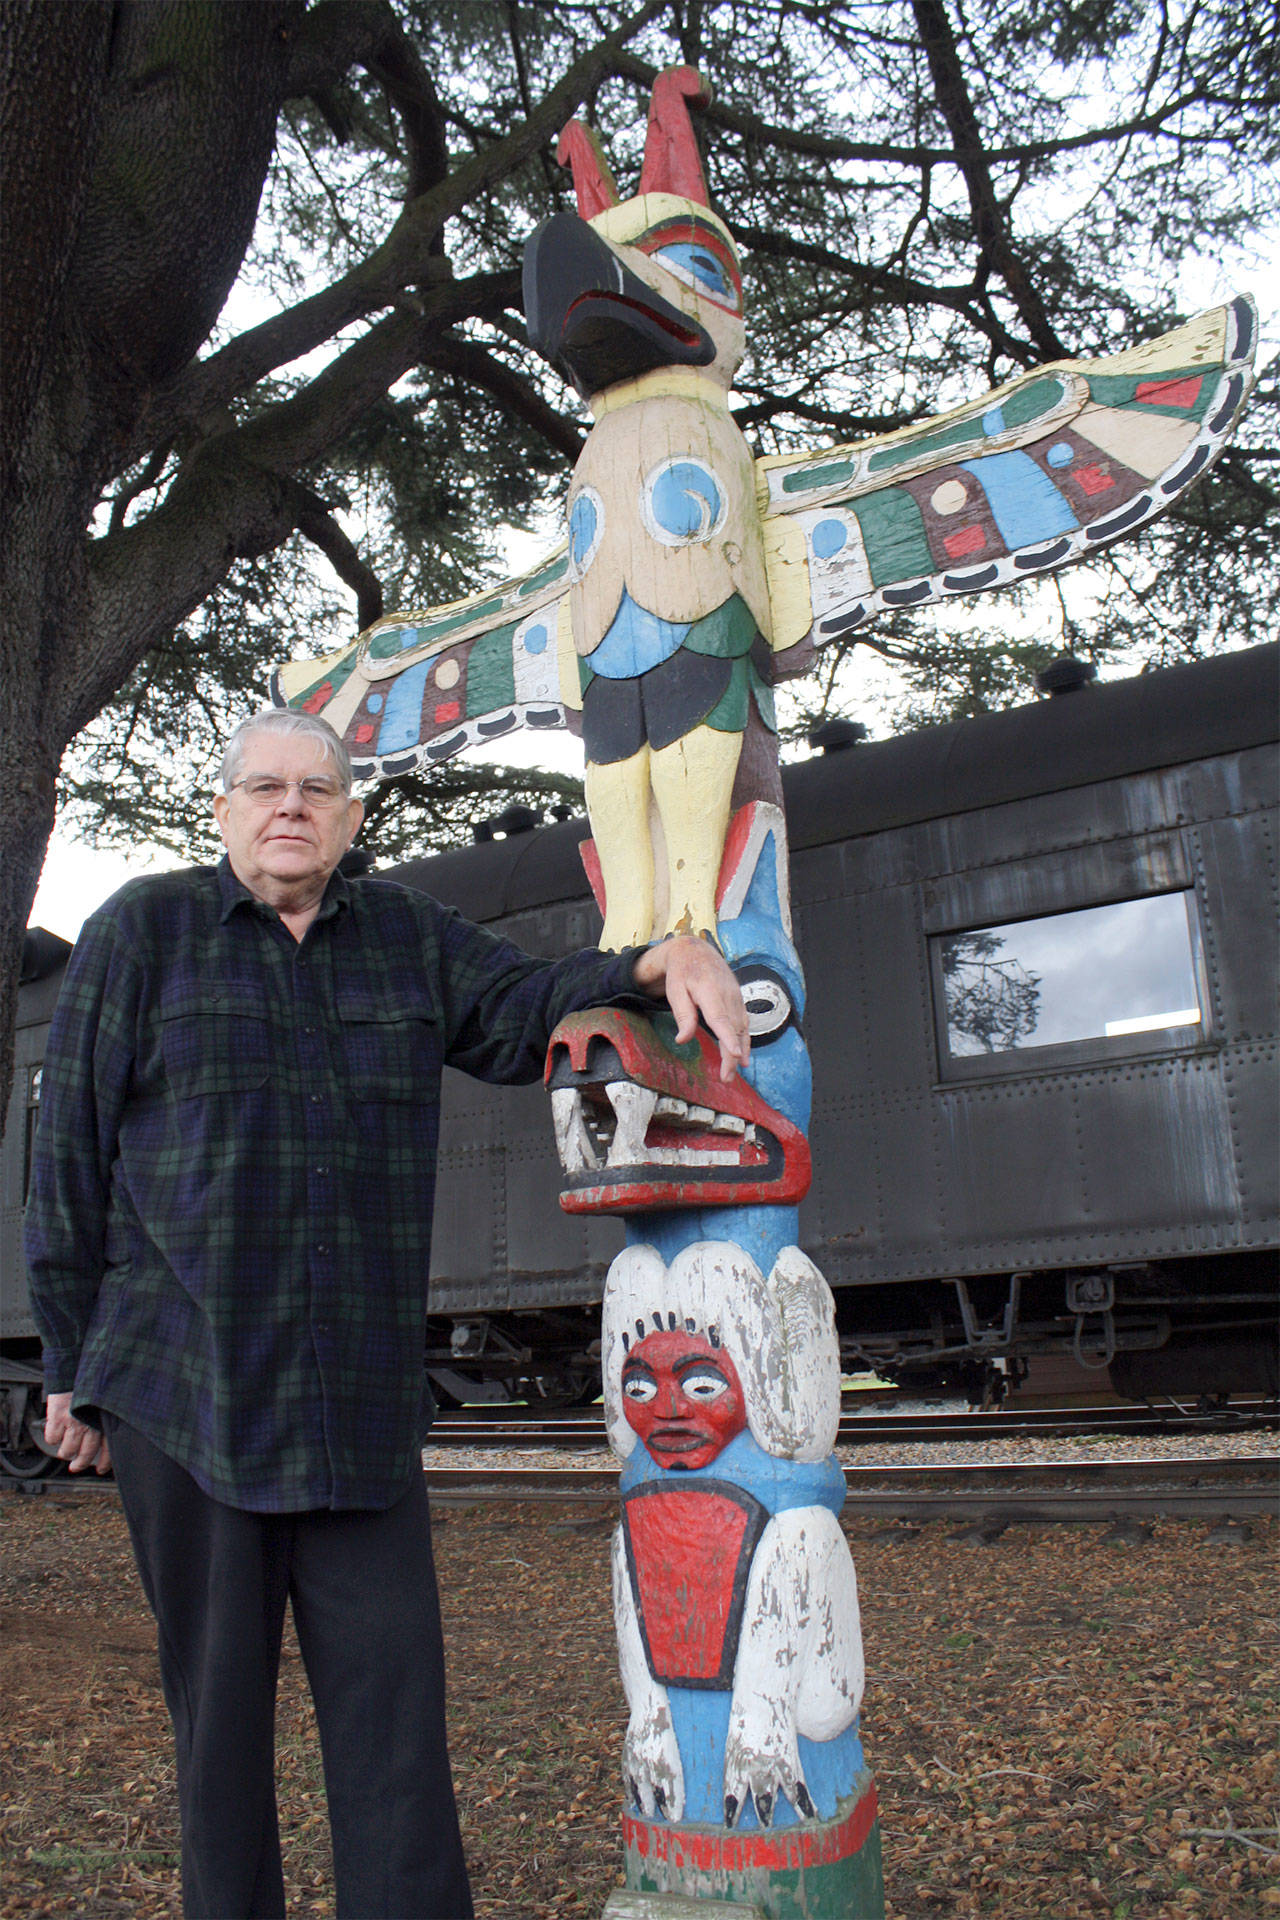 The memory of Snoqualmie city leader Charles Peterson, pictured here with the totem pole in downtown Snoqualmie, will be celebrated with a series of memorials unveiled in a dedication ceremony starting at 2 p.m., Sunday, Oct. 1, at Snoqualmie United Methodist Church. (File Photo)